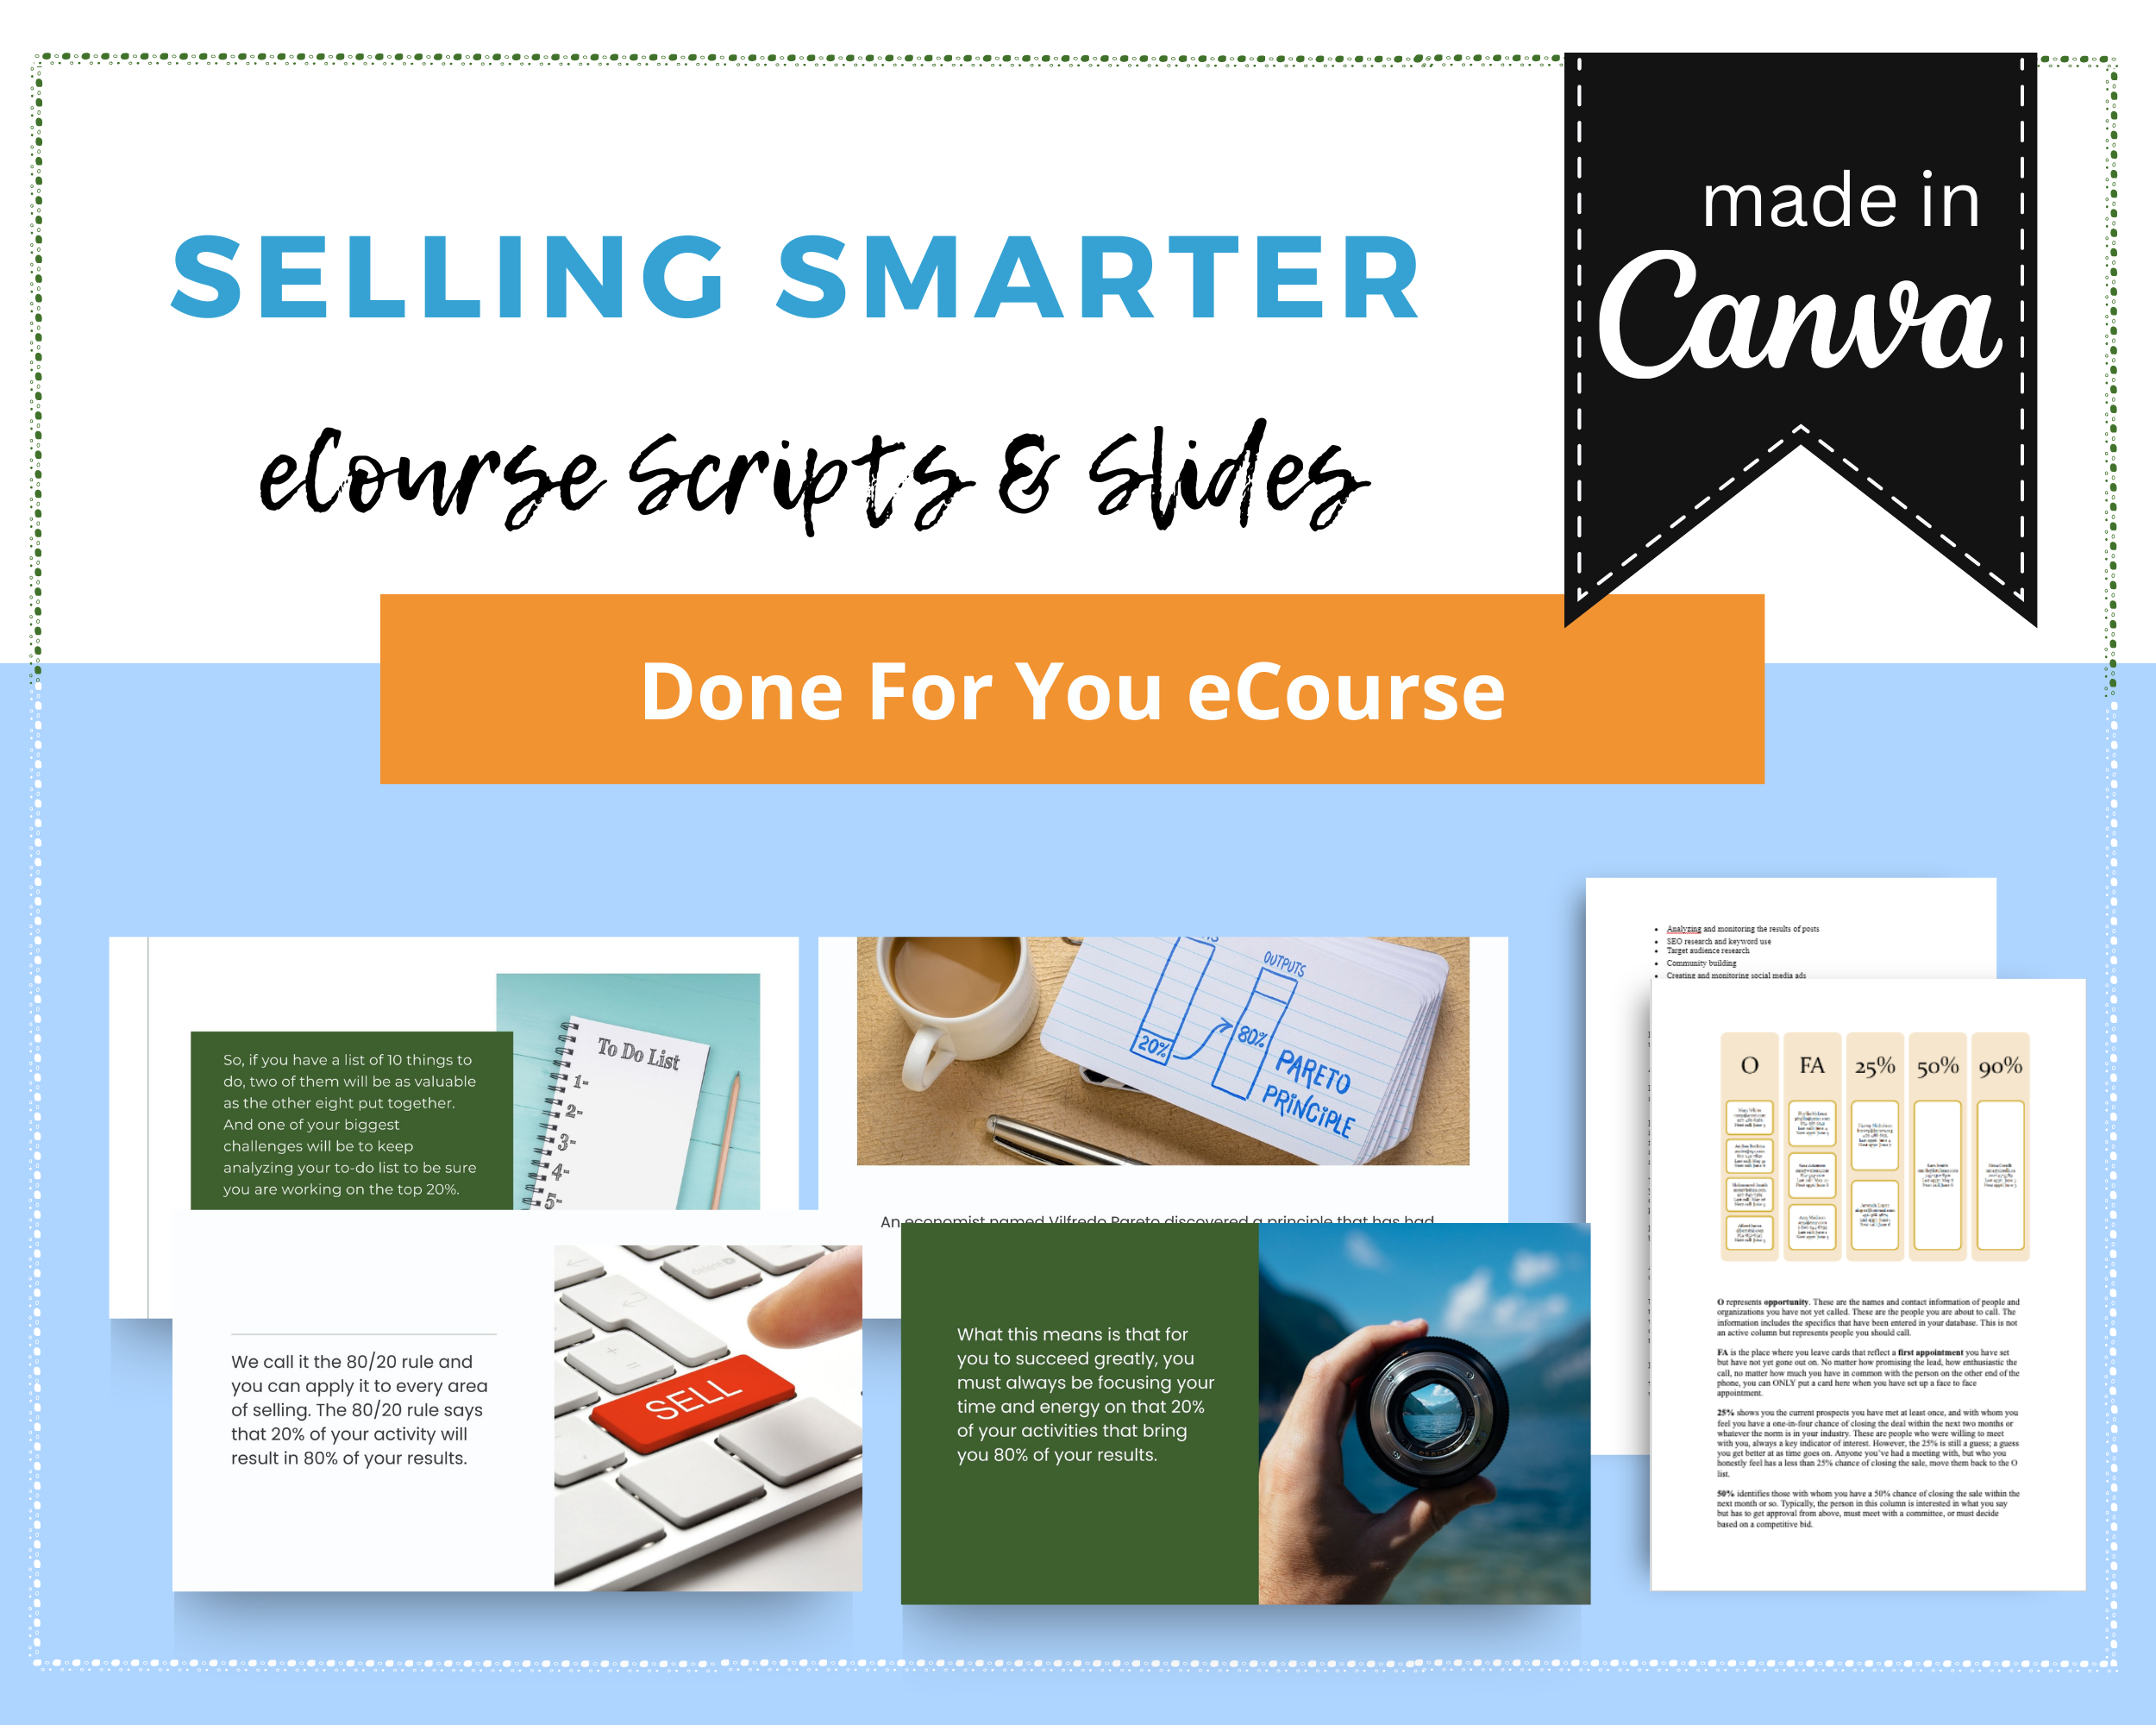 Selling Smarter Online Course | Done for You Product |  Business Course in a Box | 15 Lessons